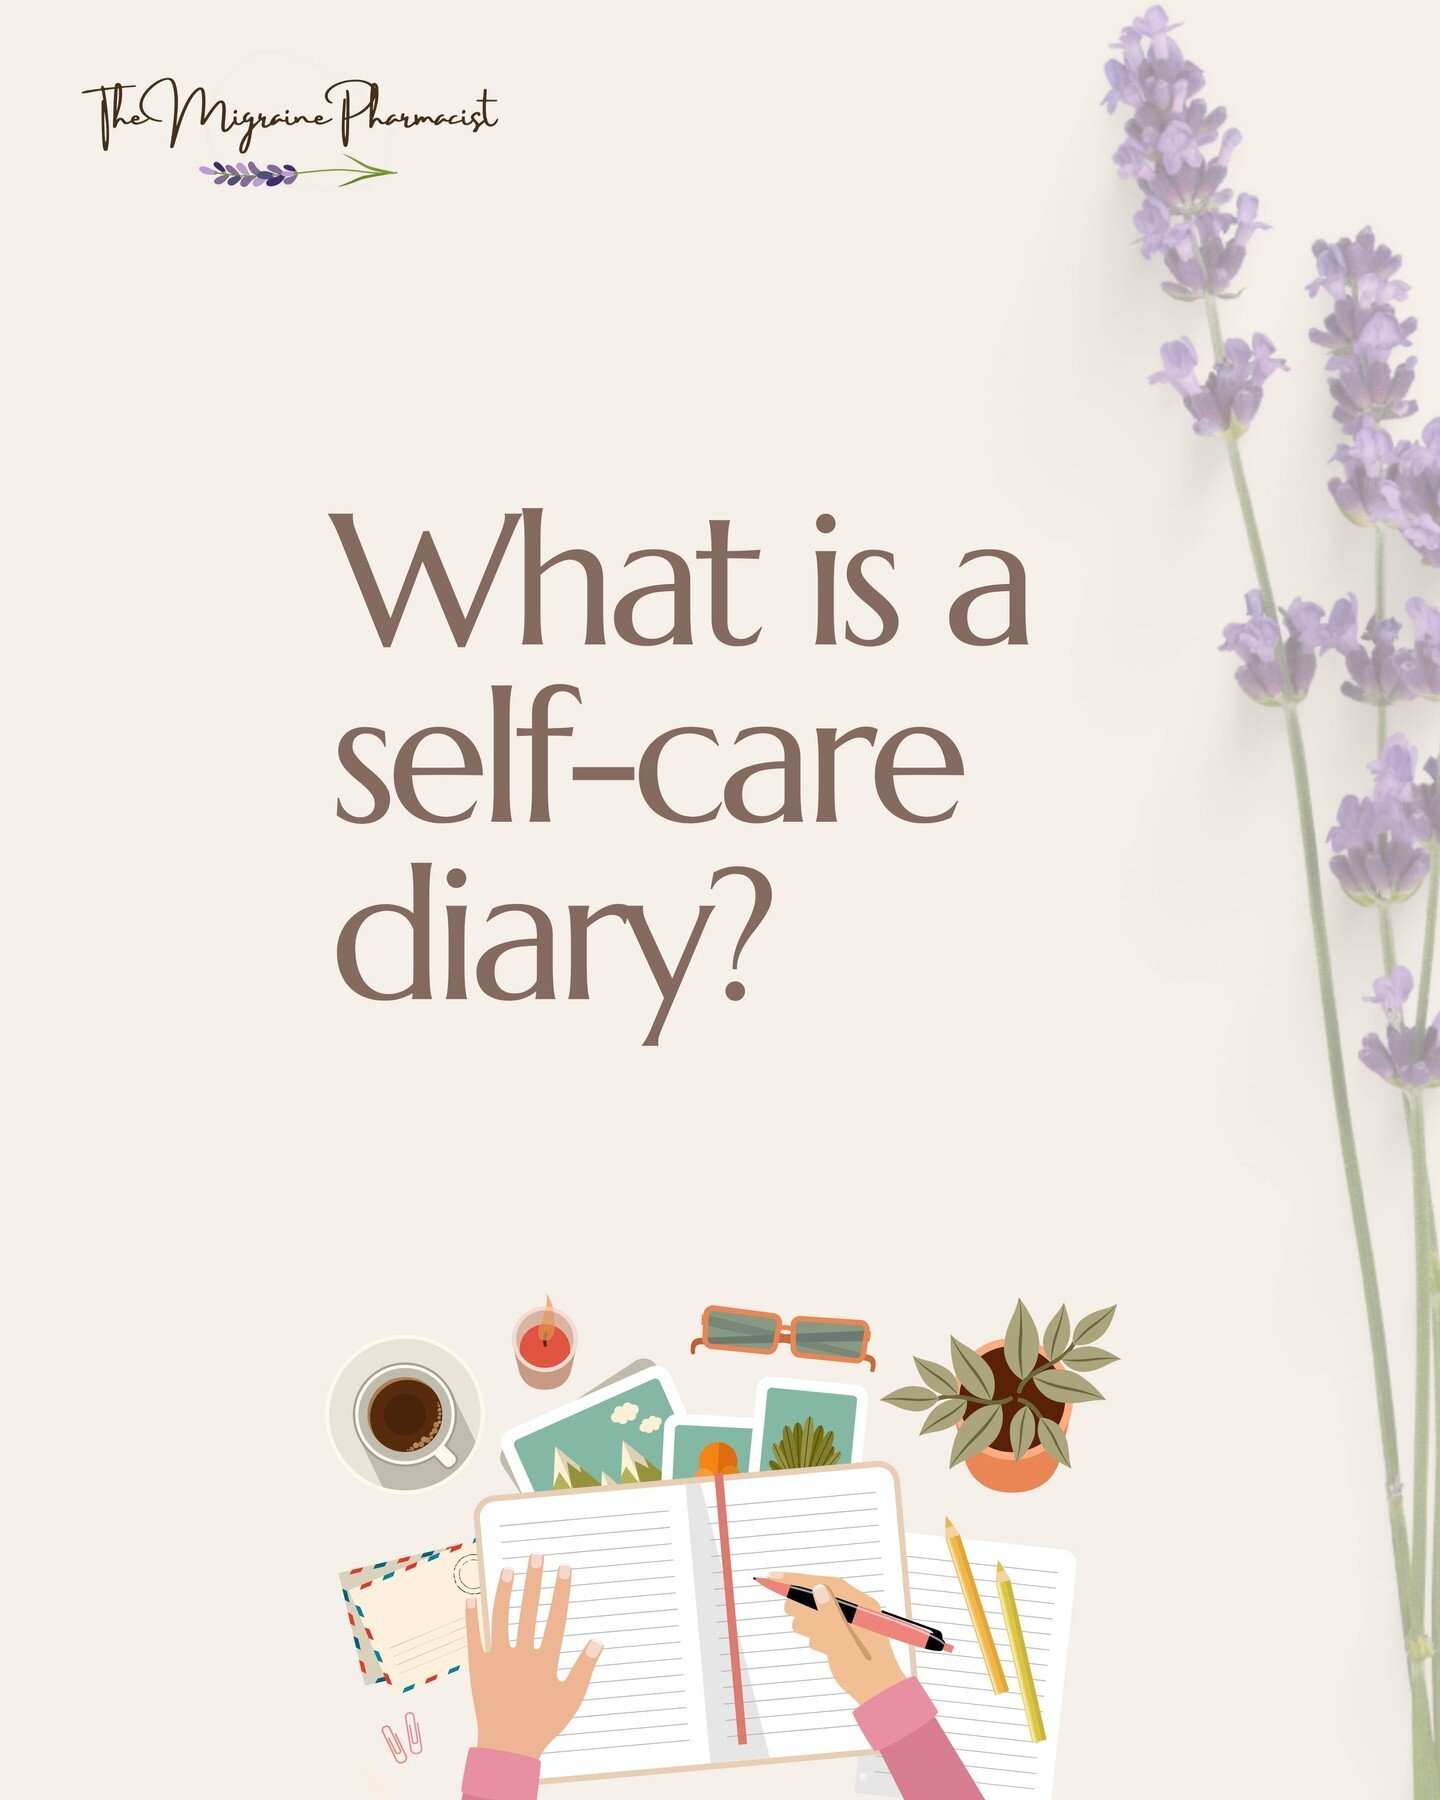 Self Care is not a luxury for people living with migraine, it is a must-have to ensure they are tracking their progress on strategies that might help them better manage their headaches and migraine. Do you keep a self-care diary? have you thought of 